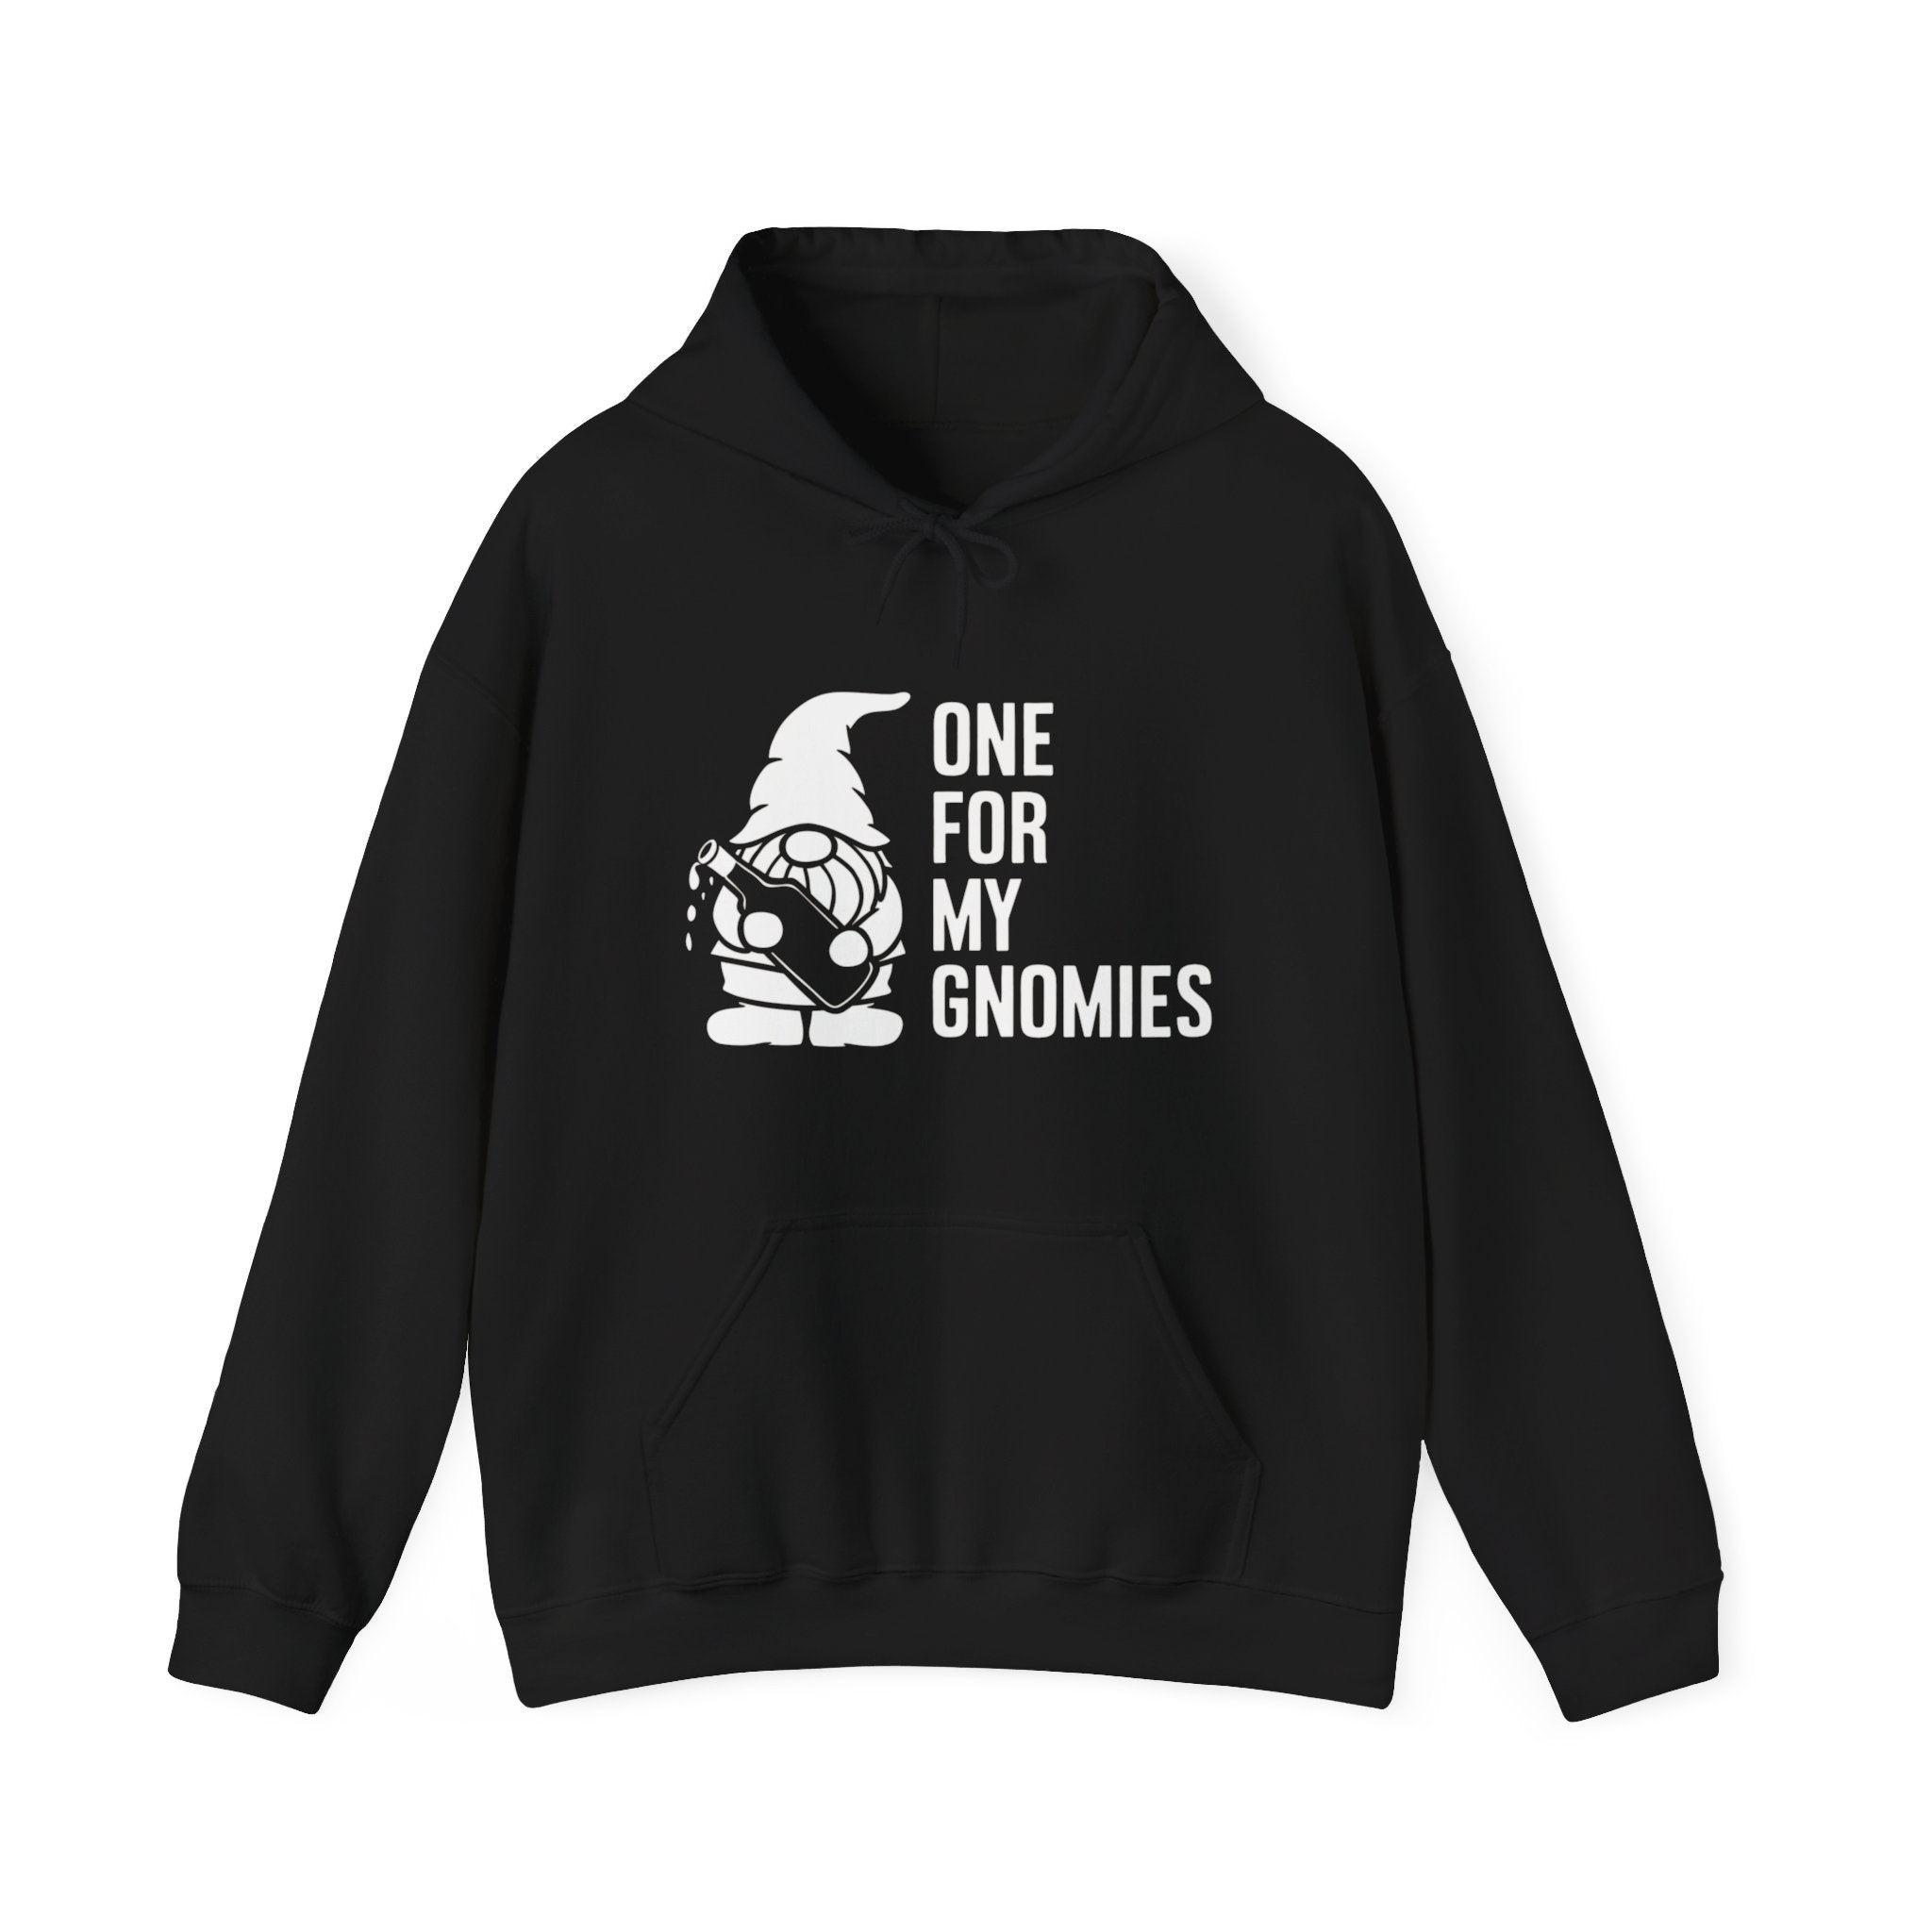 One For My Gnomies - Hooded Sweatshirt featuring a Gnomies design with a graphic of a gnome and the text "ONE FOR MY GNOMIES" on the front.